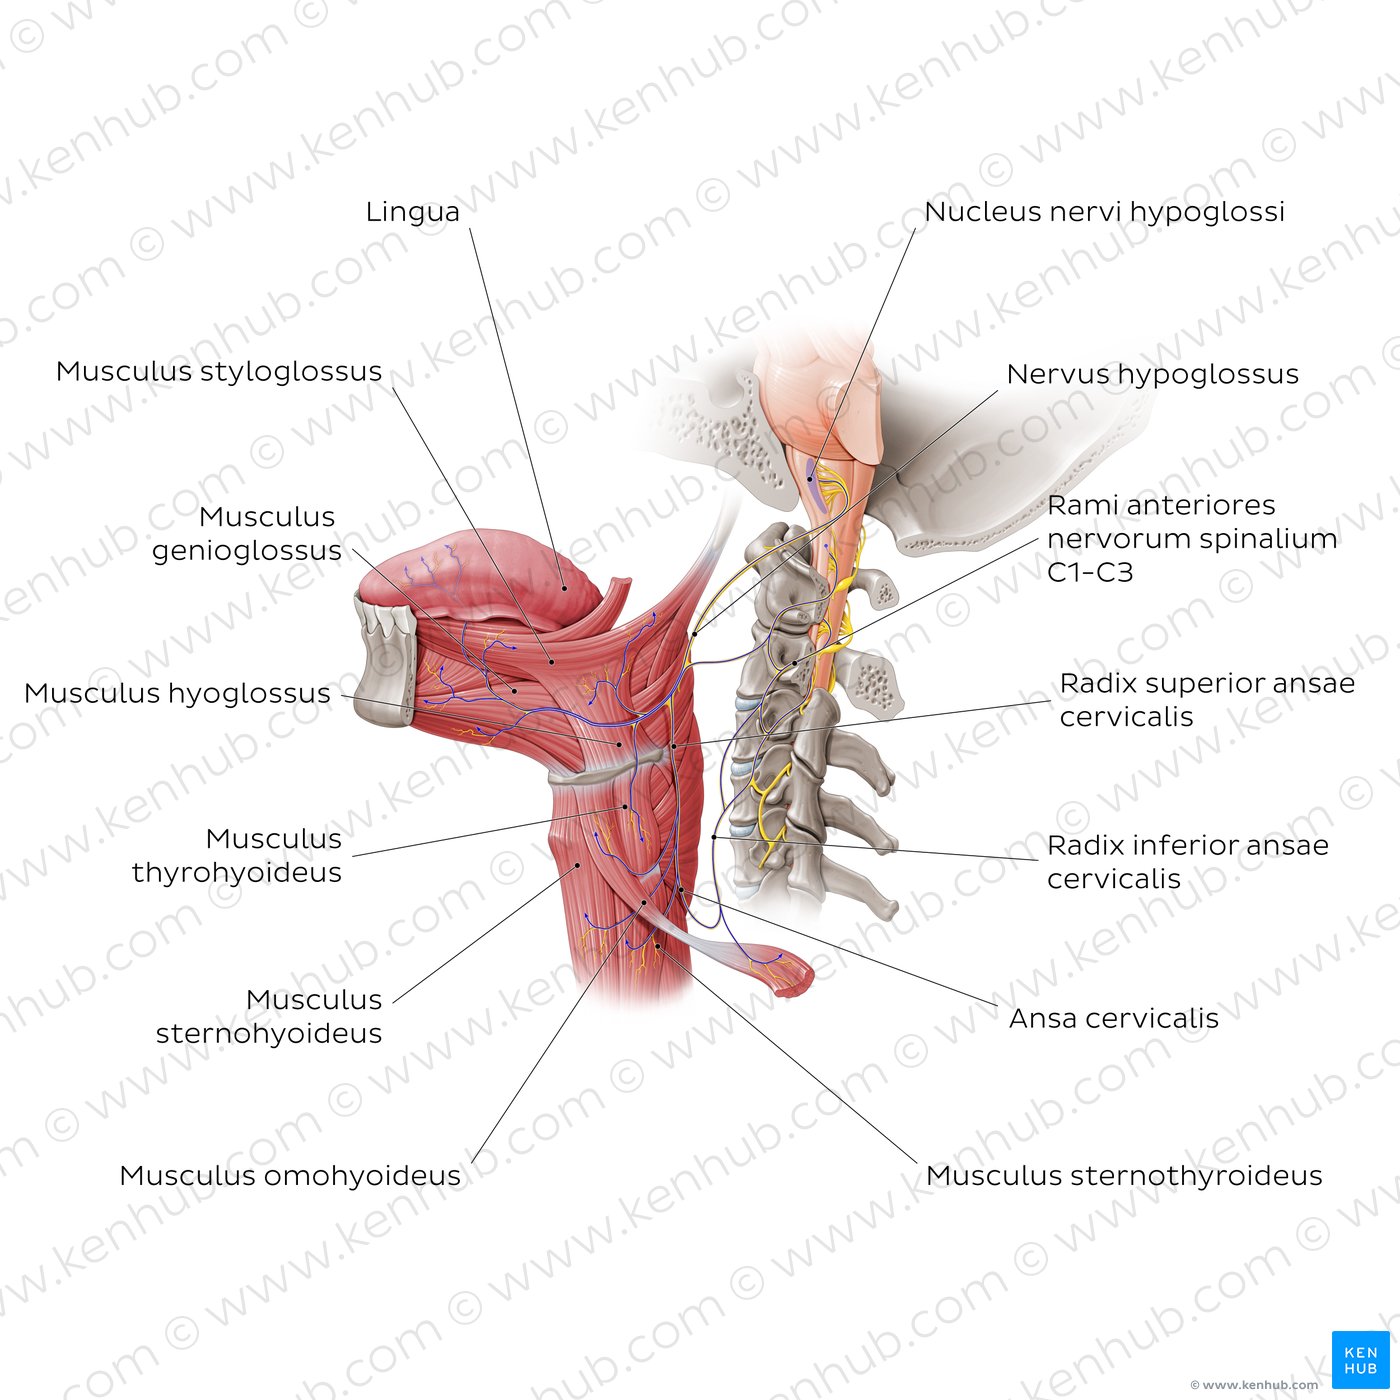 Overview of the n. hypoglossus